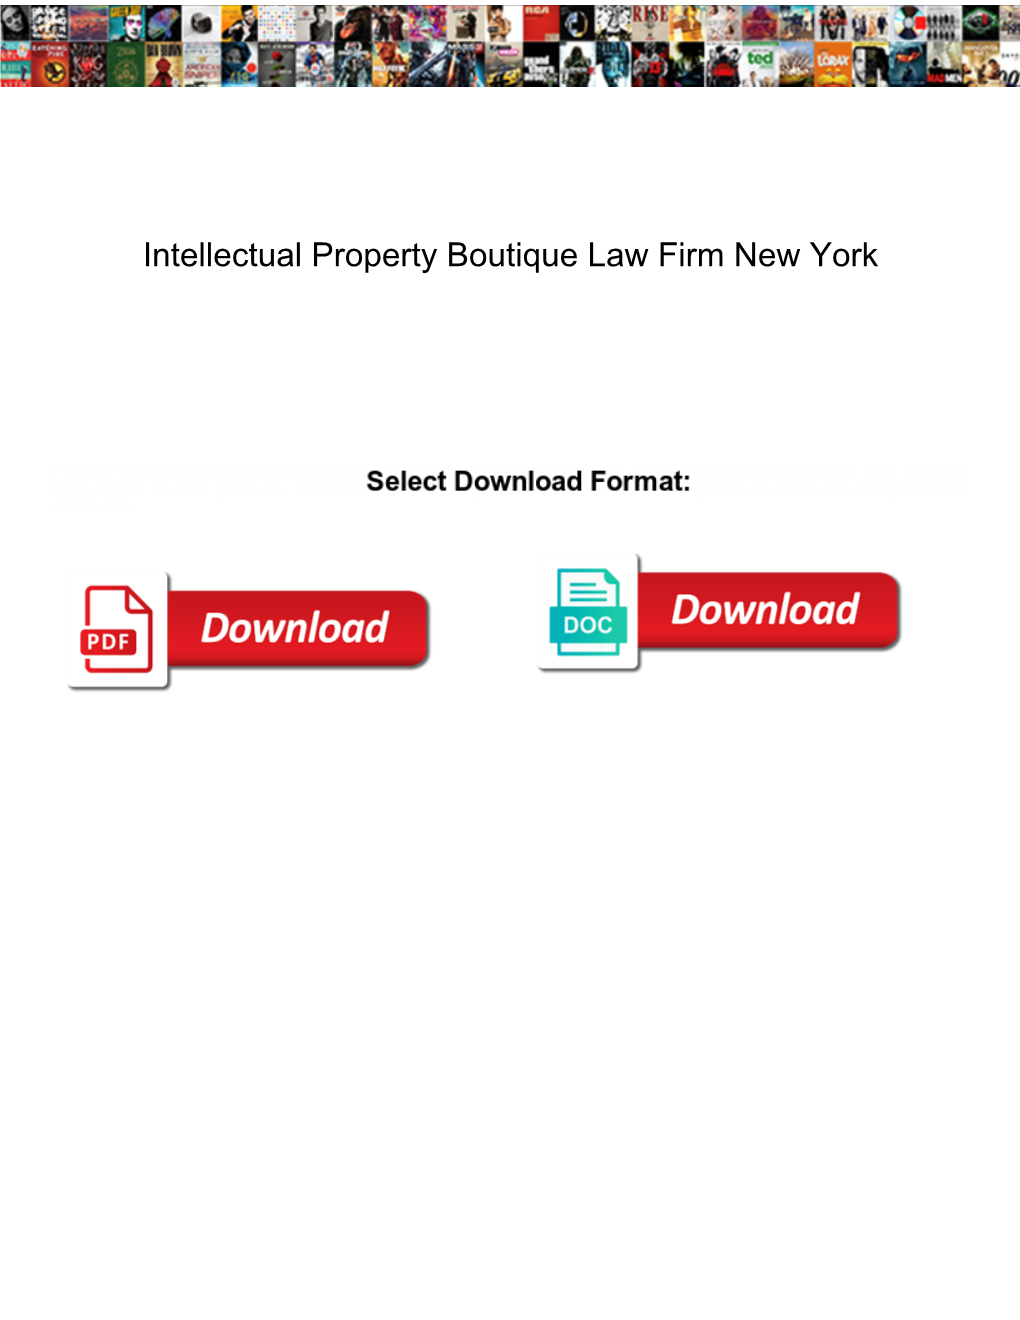 Intellectual Property Boutique Law Firm New York